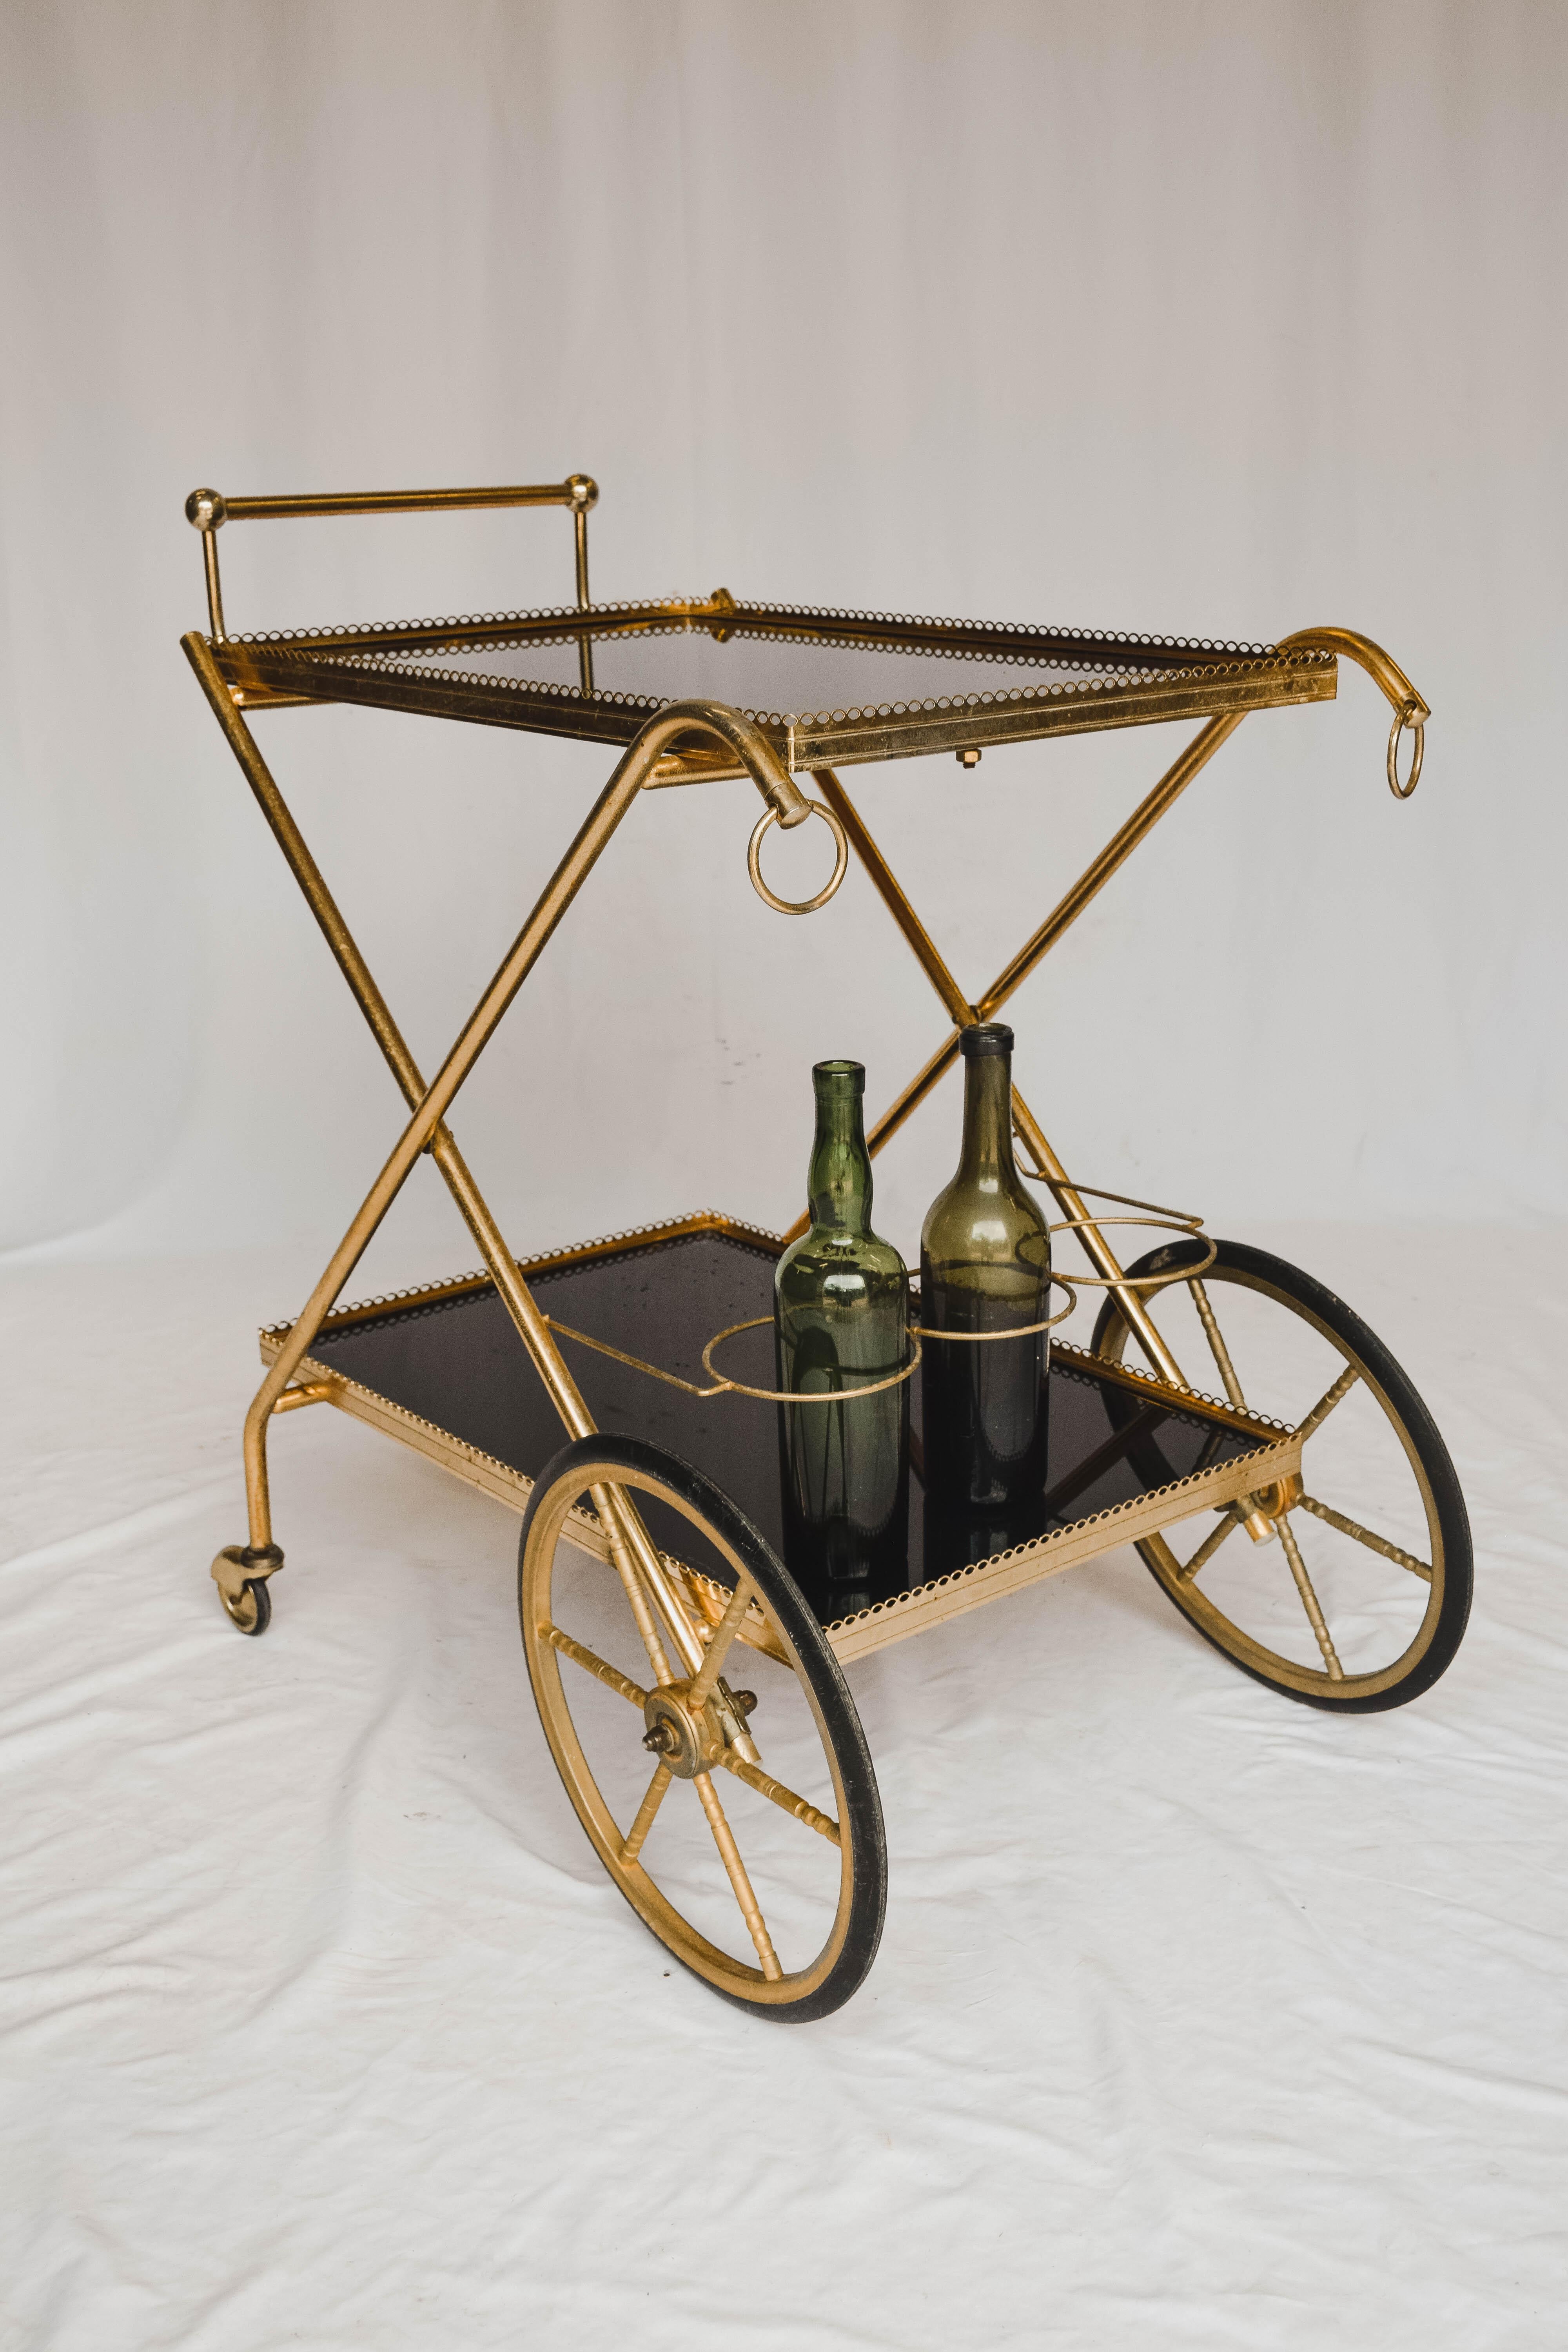 Mahogany and brass cocktail trolly. Bring 